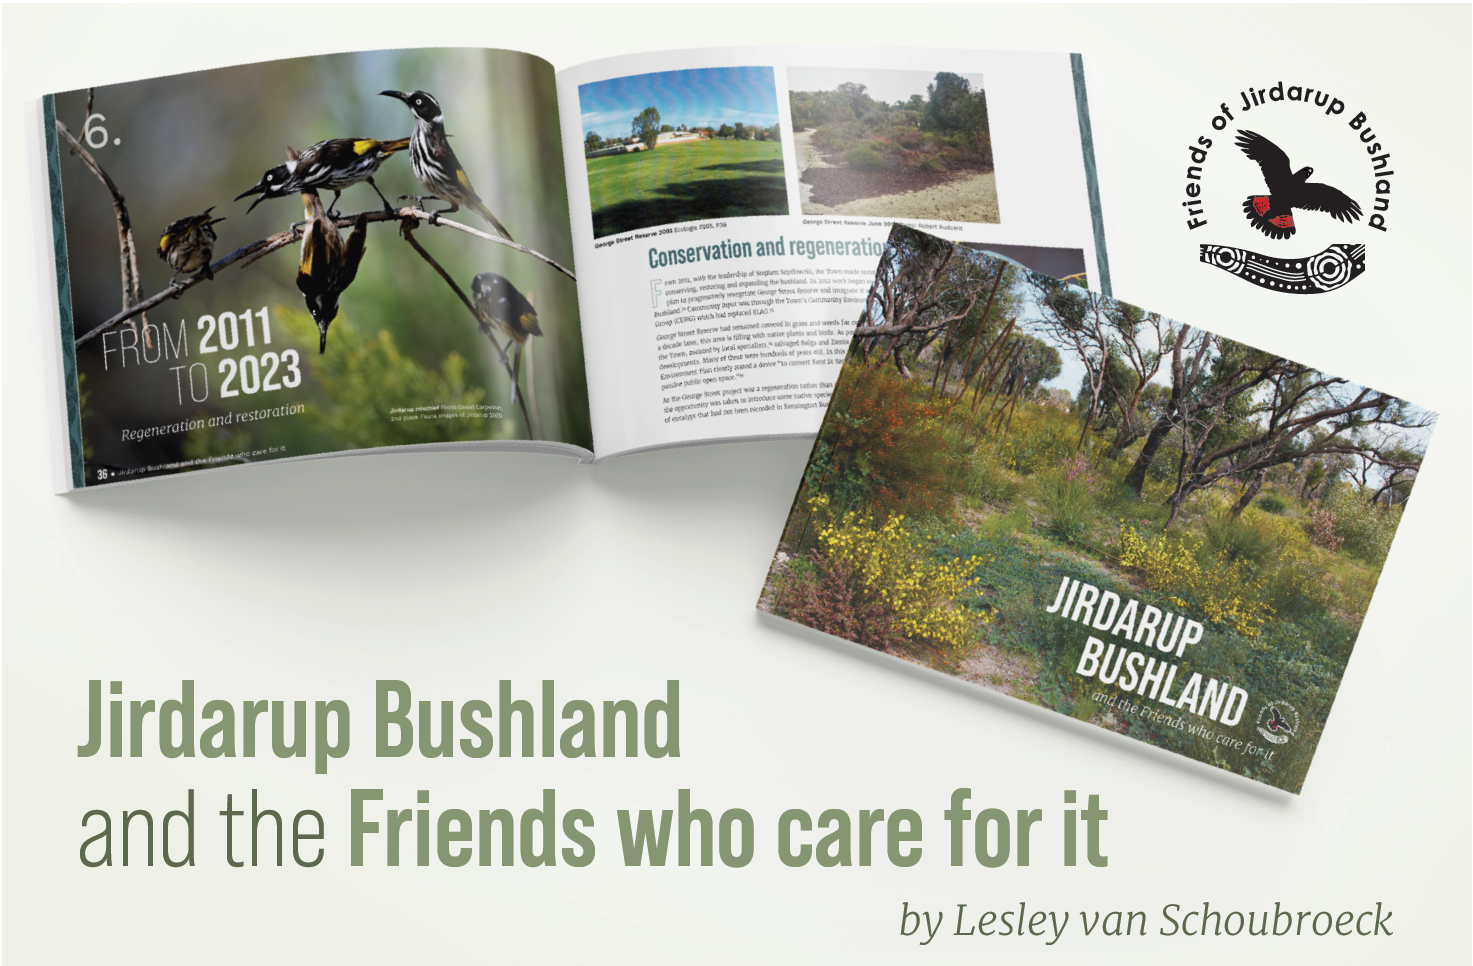 Jirdarup Bushland and the Friends who care for it